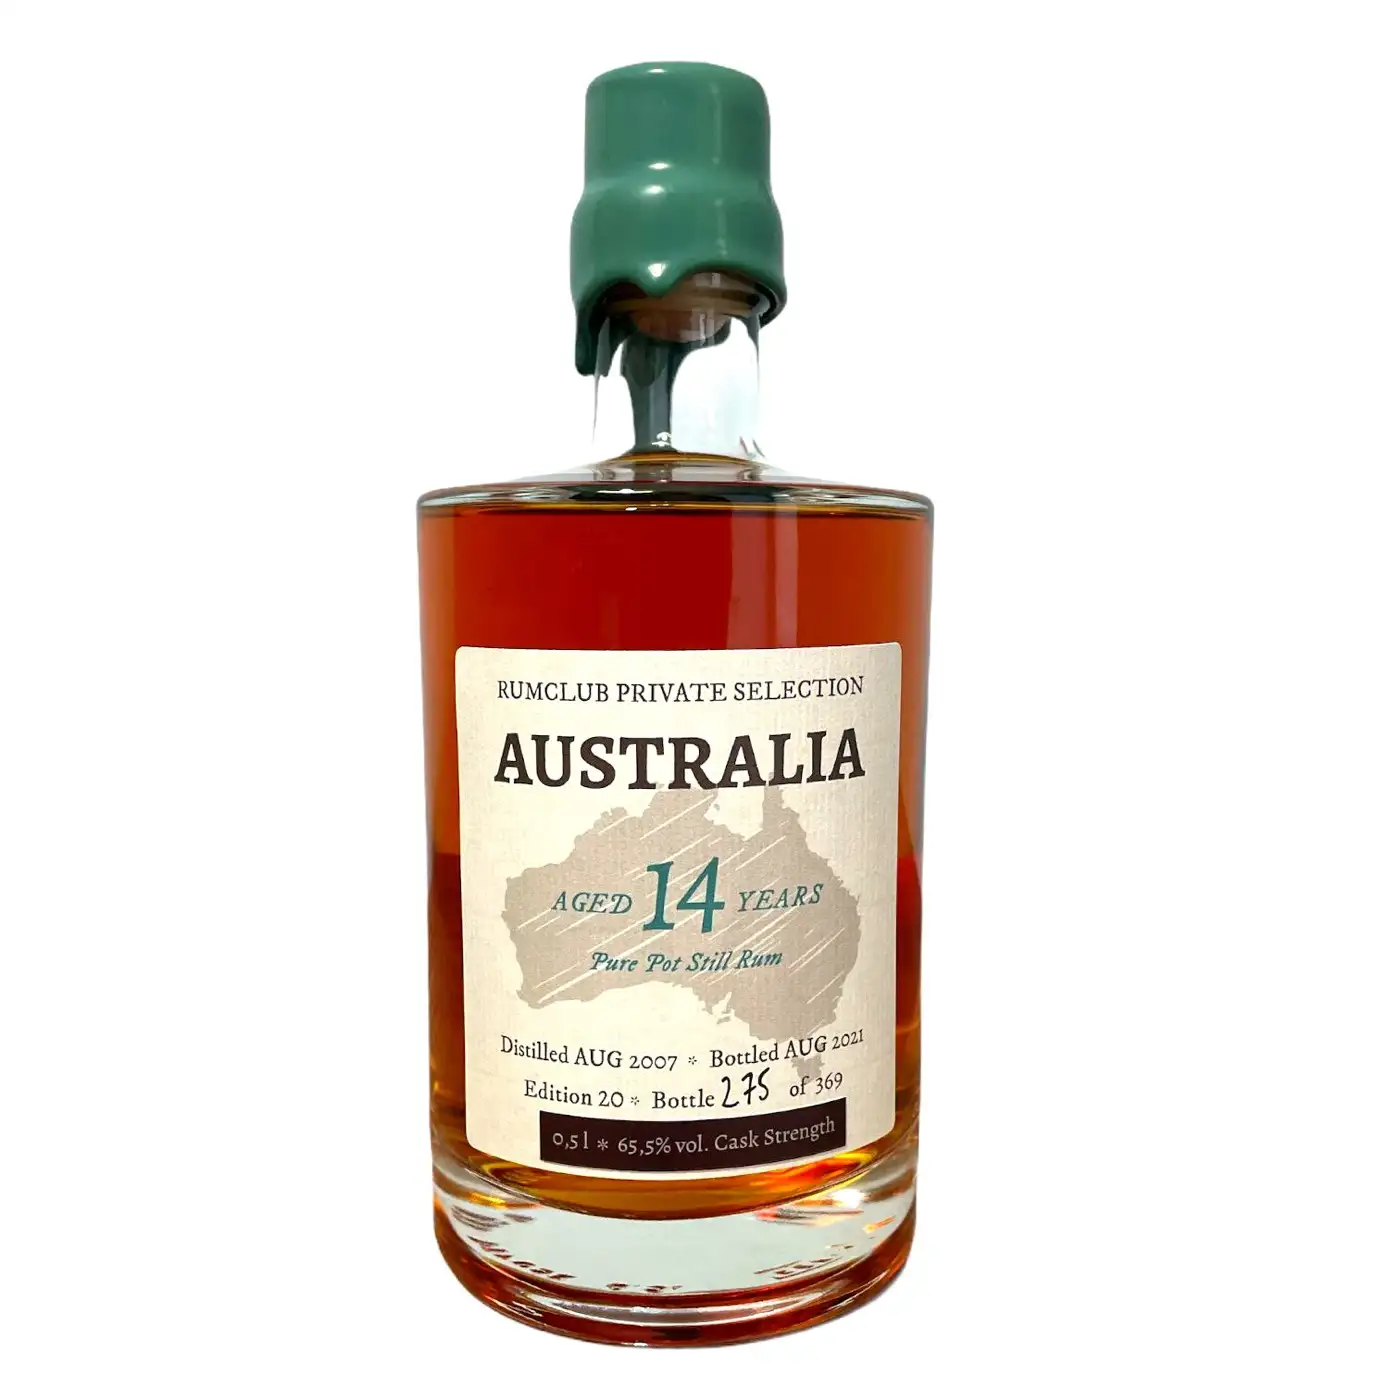 Image of the front of the bottle of the rum Rumclub Private Selection Ed. 20 Australia 14 Years